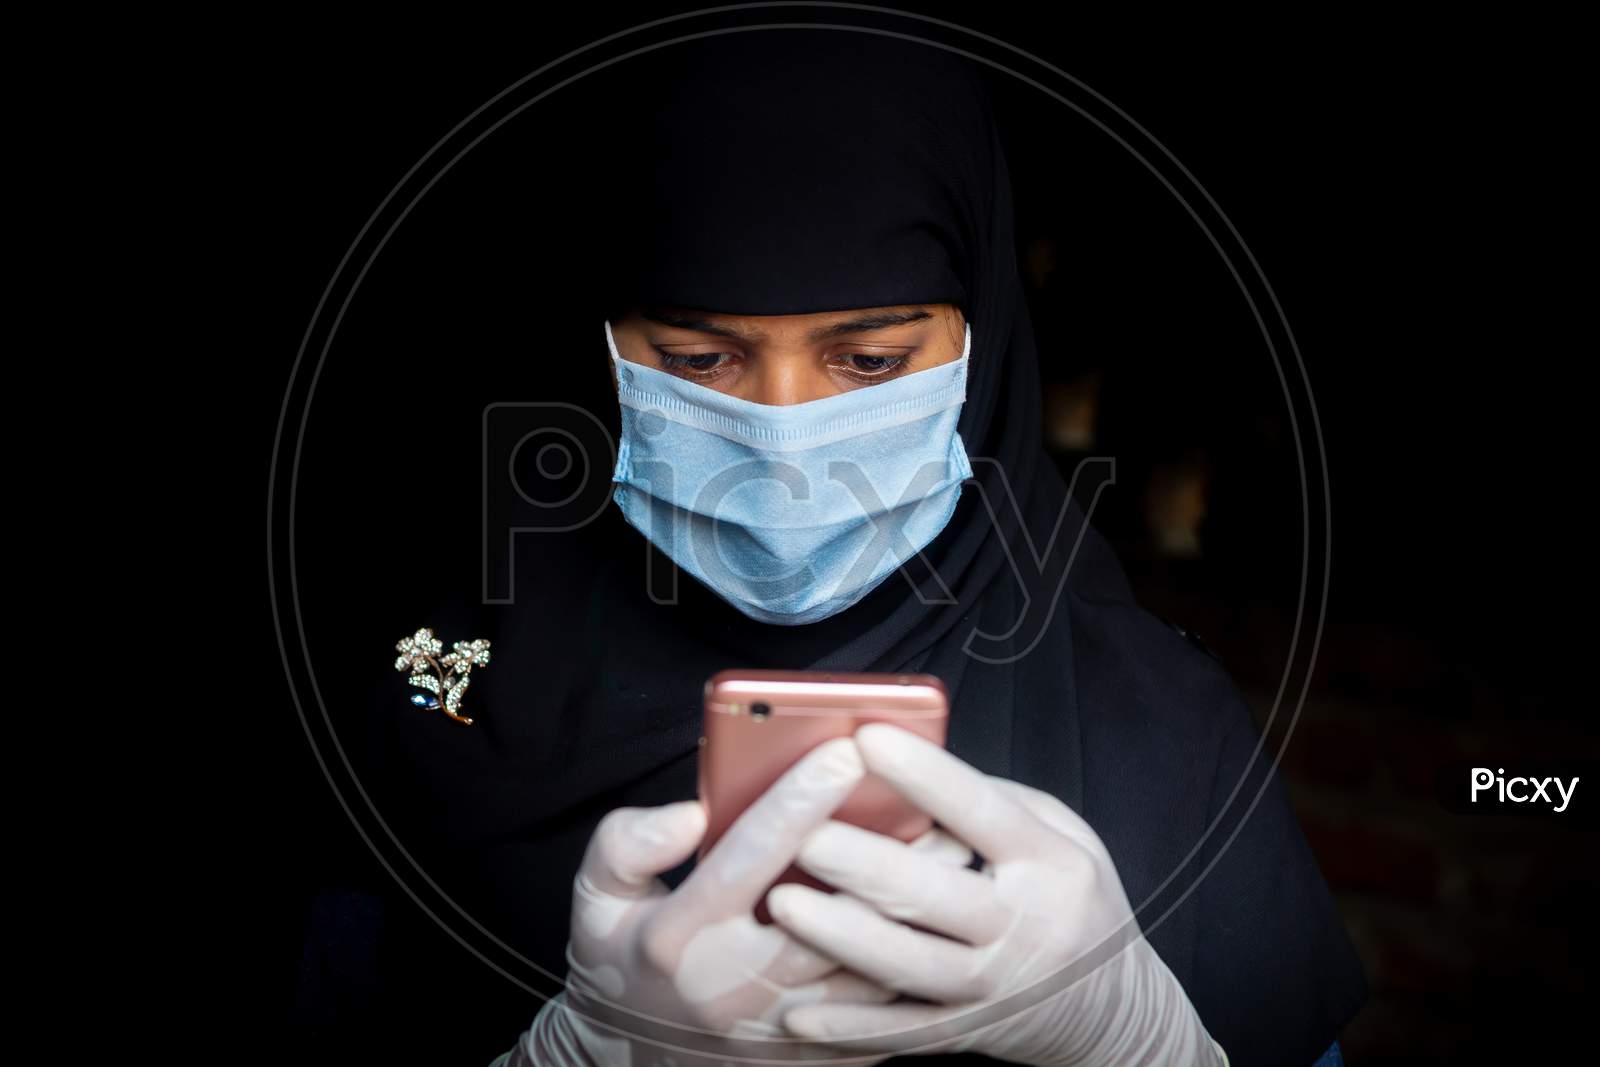 A Safety Mask-Wearing An Asian Muslim Girl Is Using His Smartphone. Black Hijab Woman Wearing A Blue Mask For Coronavirus Safety.